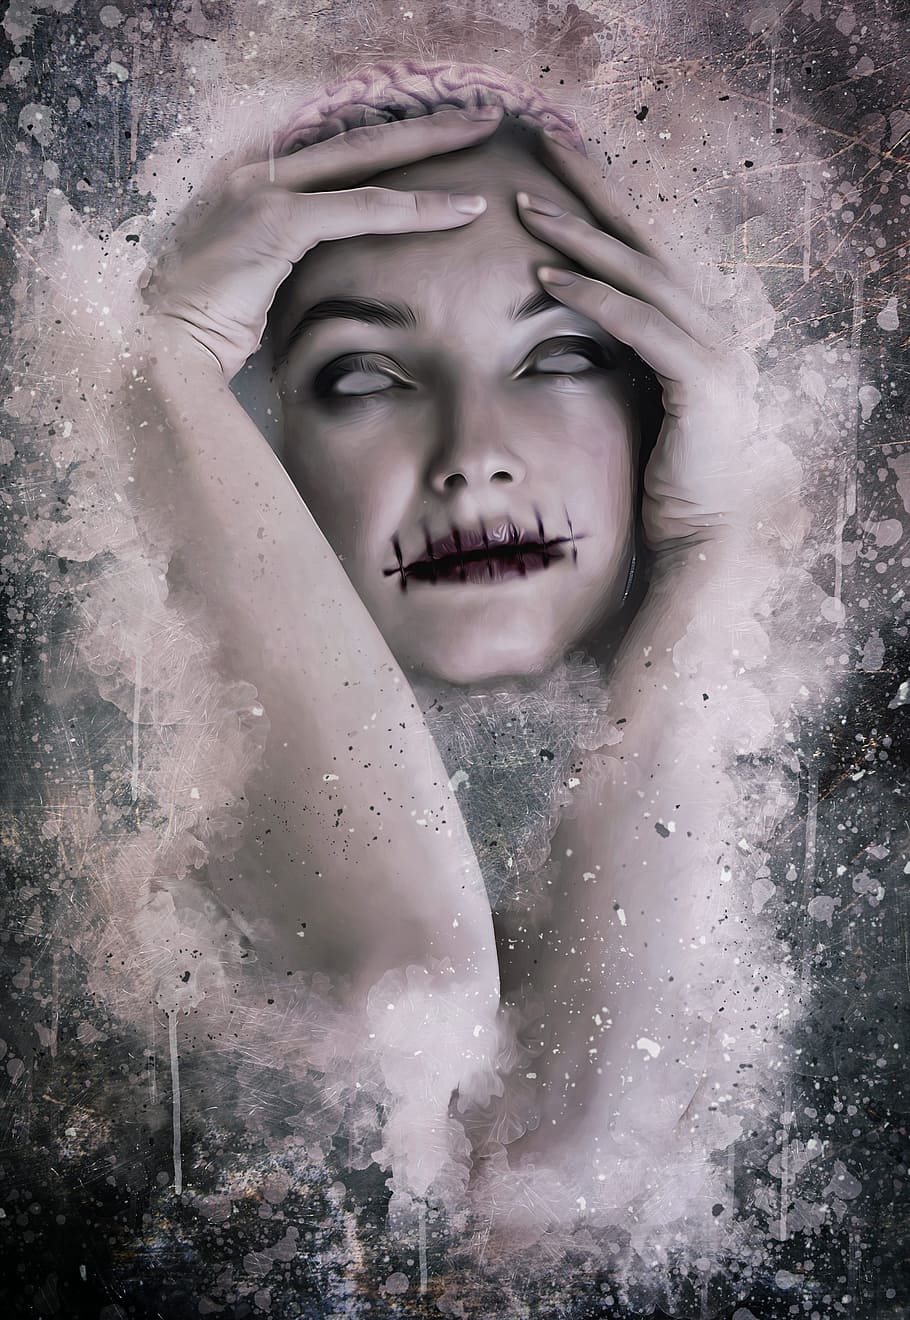 person with sewed lips illustration, horror, macabre, dark, gothic